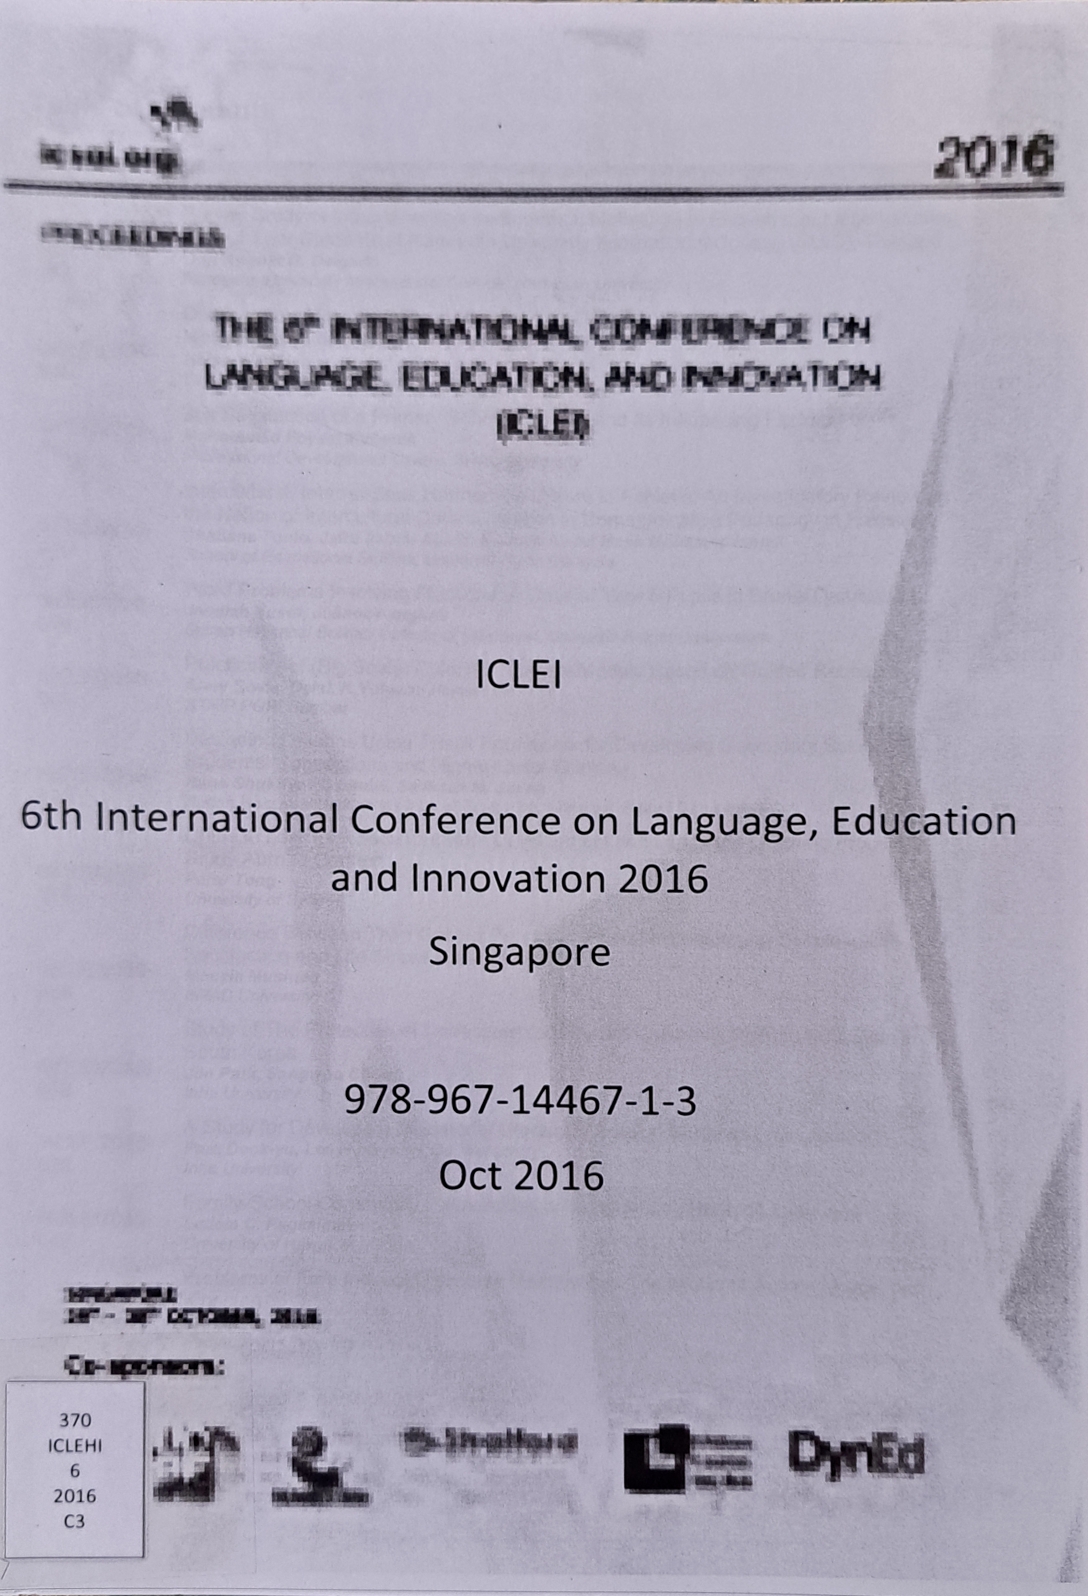 Cover image for 6th International conference on language, education, humanities and innovation 2016 Singapore (ICLEHI) / Oct 2016 bibliographic